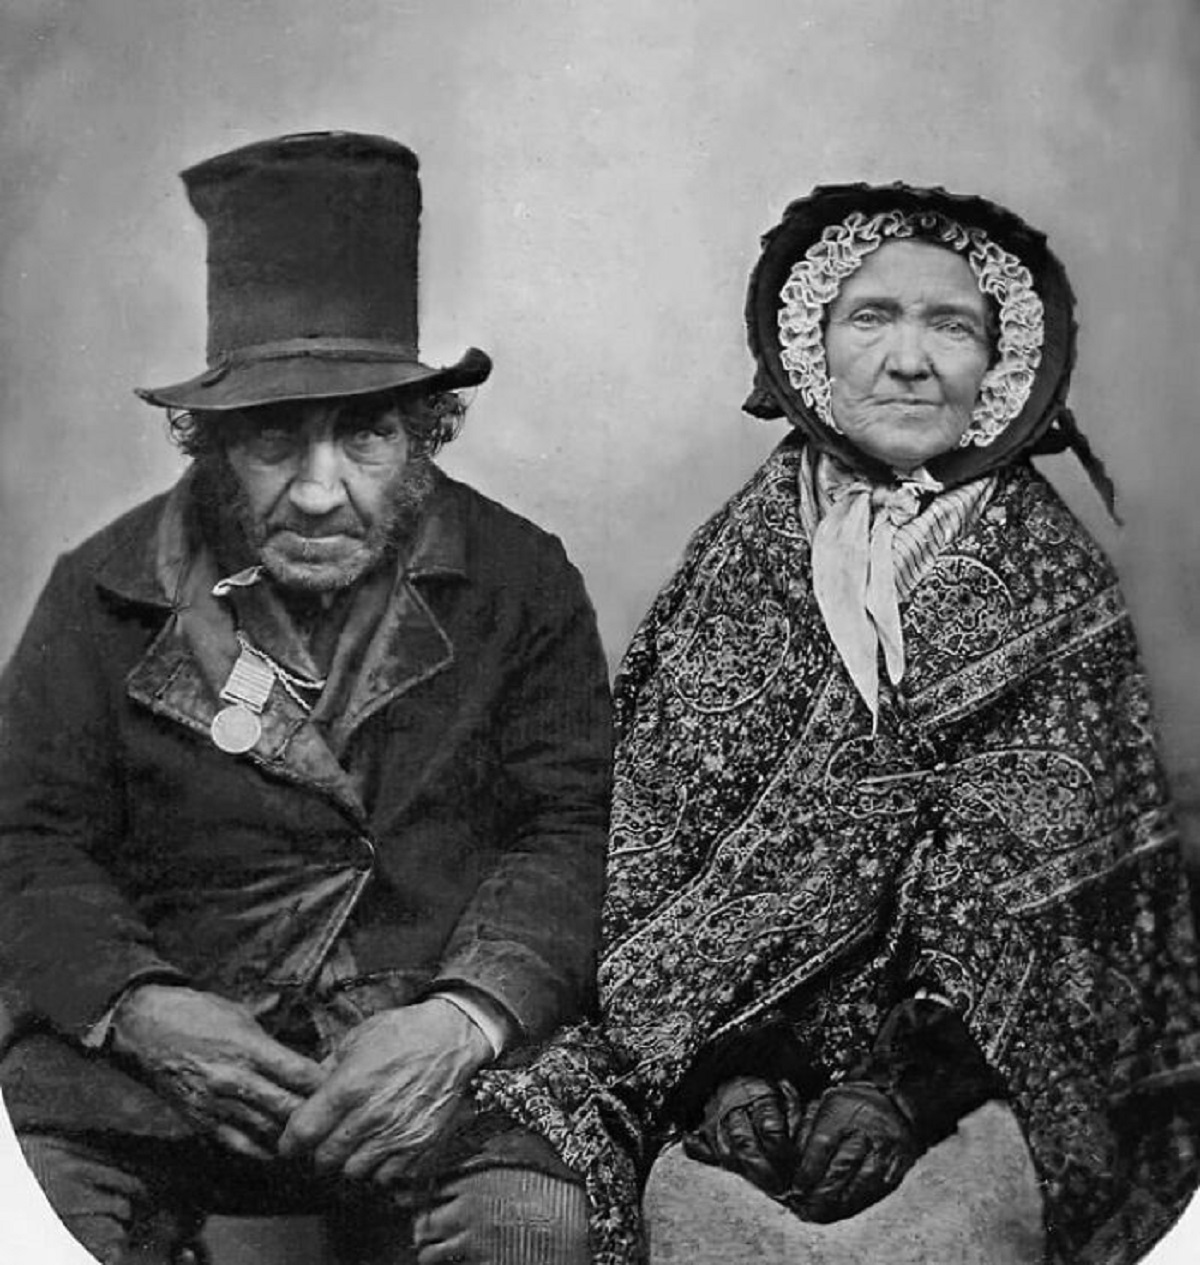 This Is A Photo Of A British Veteran Of The Napoleonic Wars Posing With His Wife. He Can Be Seen Wearing A Campaign Medal, Commemorating The Fact That He Served In Spain